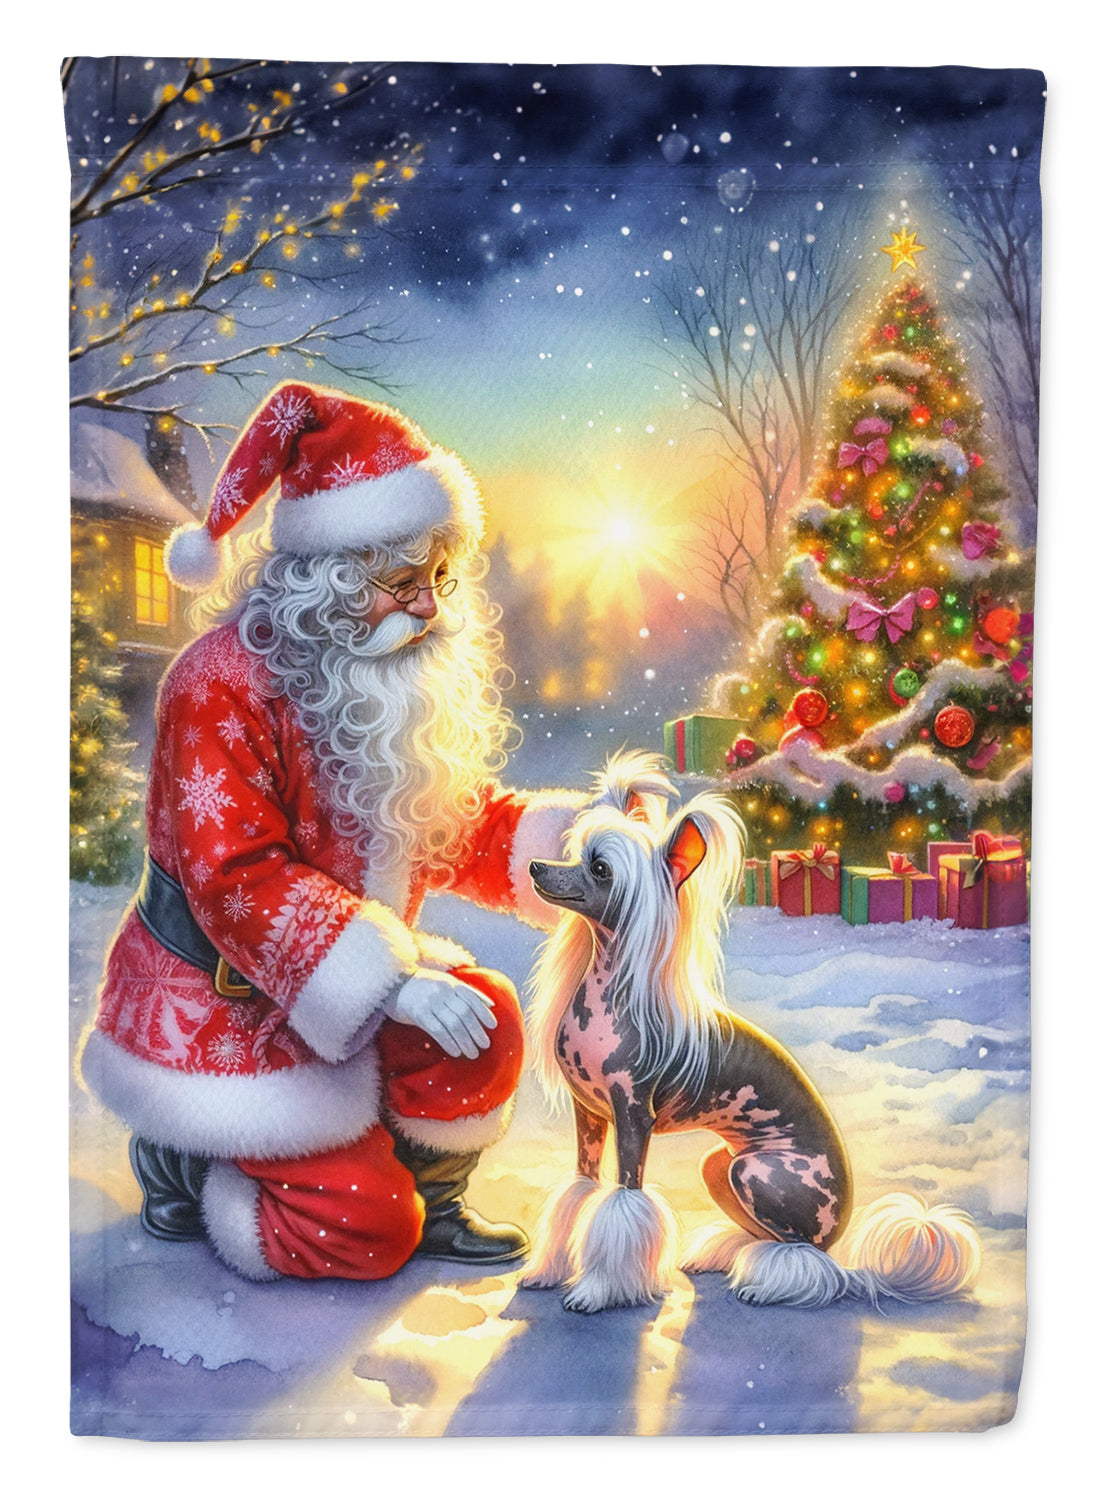 Buy this Chinese Crested and Santa Claus Garden Flag